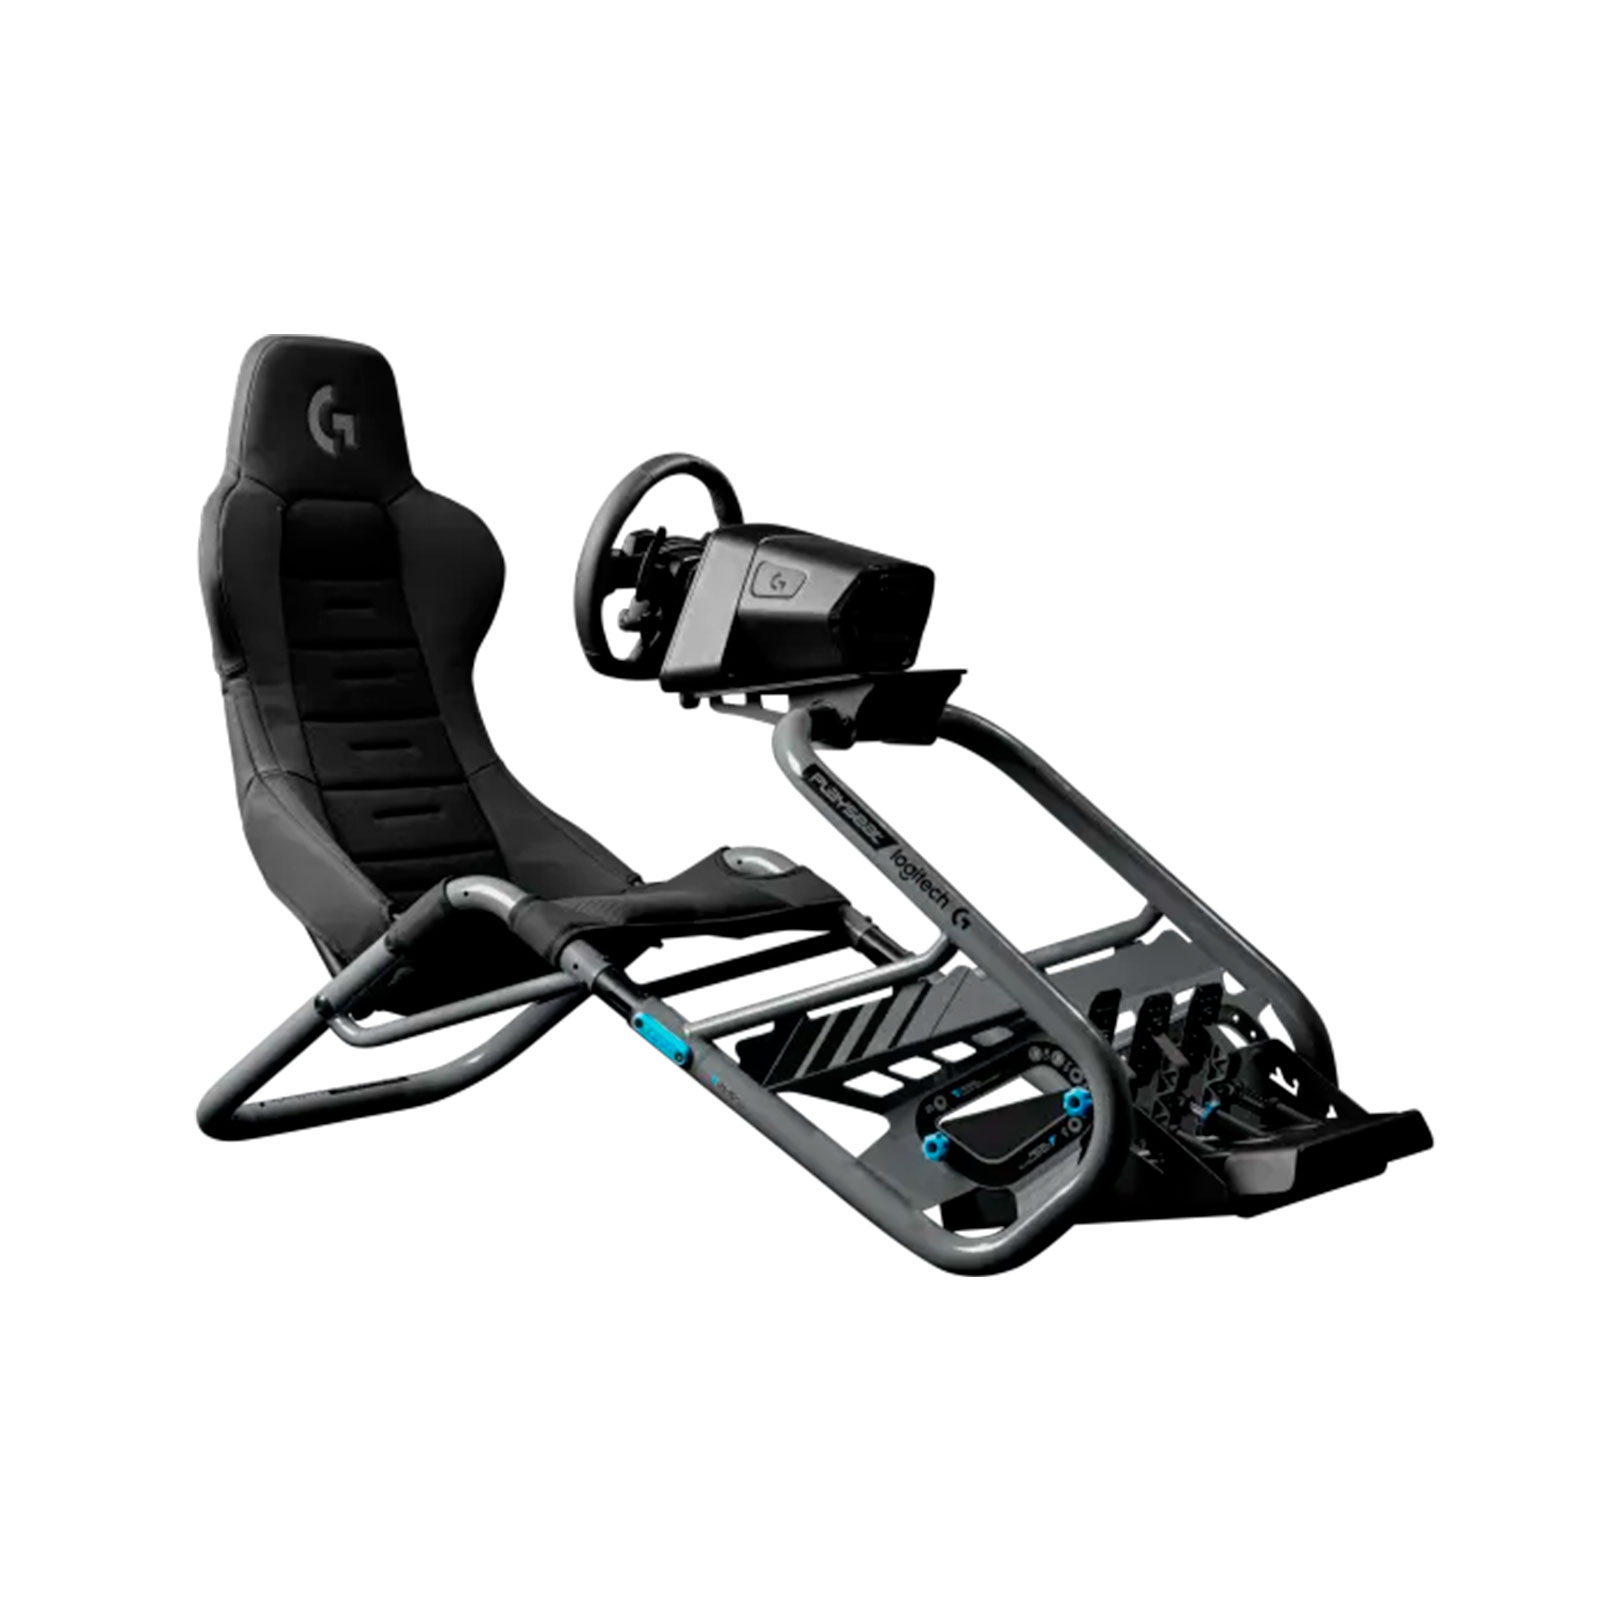 Buy Playseat Trophy Logitech G Edition from £449.97 (Today) – Best